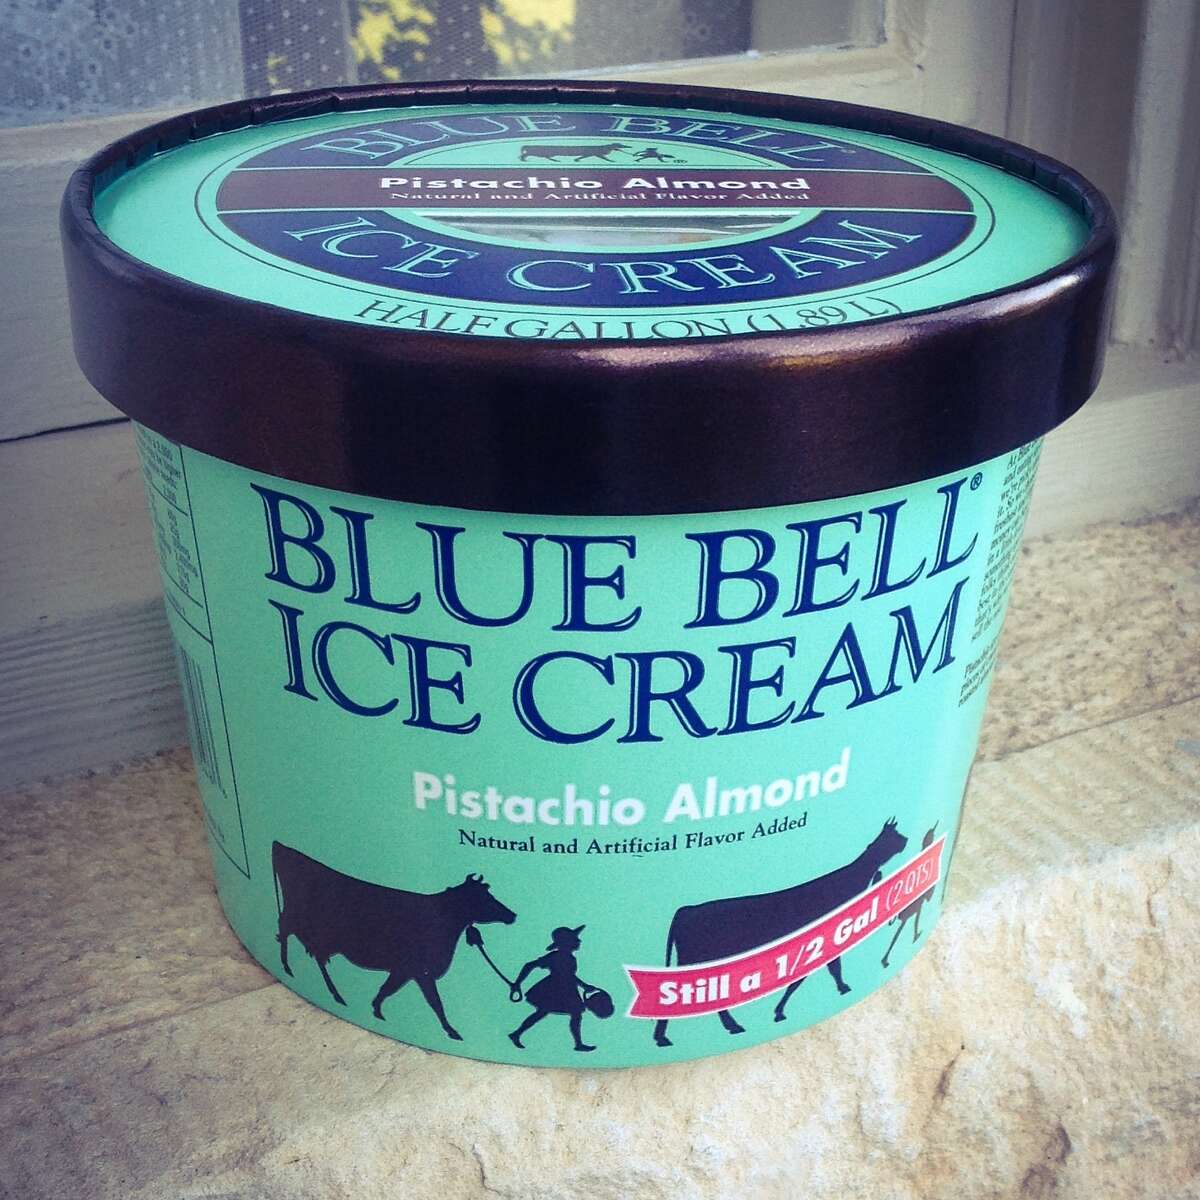 Blue Bell's new Pistachio Almond flavor hit shelves on Monday, Nov. 30. RELATED PHOTOS: Blue Bell's recall and return gets the Internet meme treatment ...